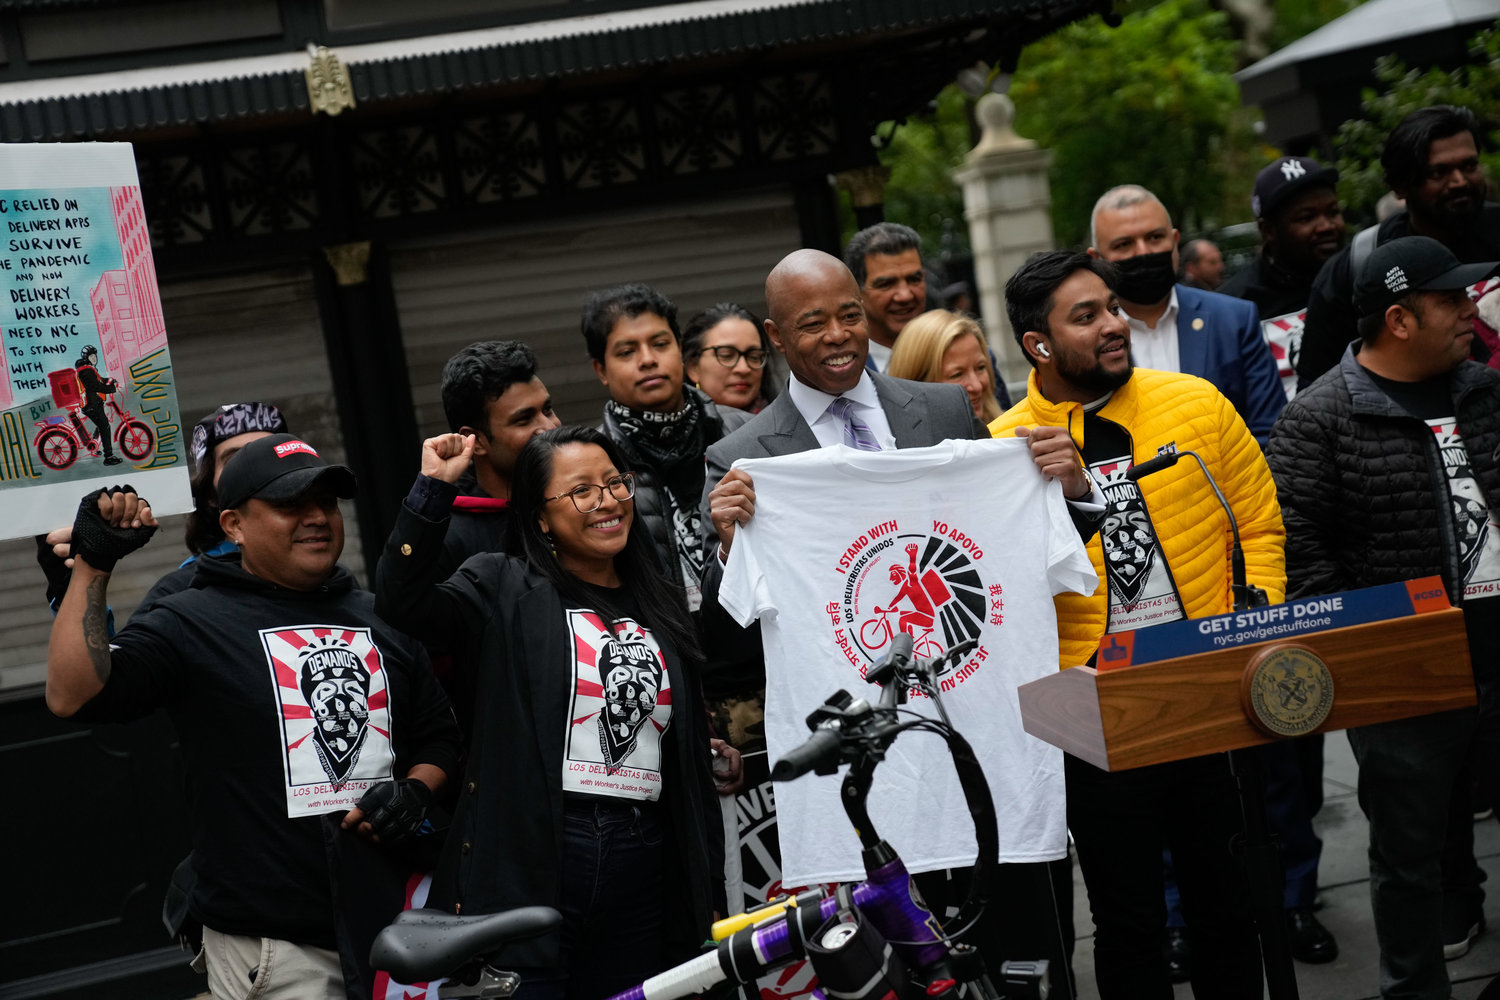 Mayor Eric Adams last month announced that the city would be facilitating the first-in-nation street hubs to serve food delivery workers. Last week, the city’s Department of Consumer and Worker Protection released a report proposing a $23.82 minimum hourly wage for the workers. They and their advocates, though, are calling for a $30 minimum wage.